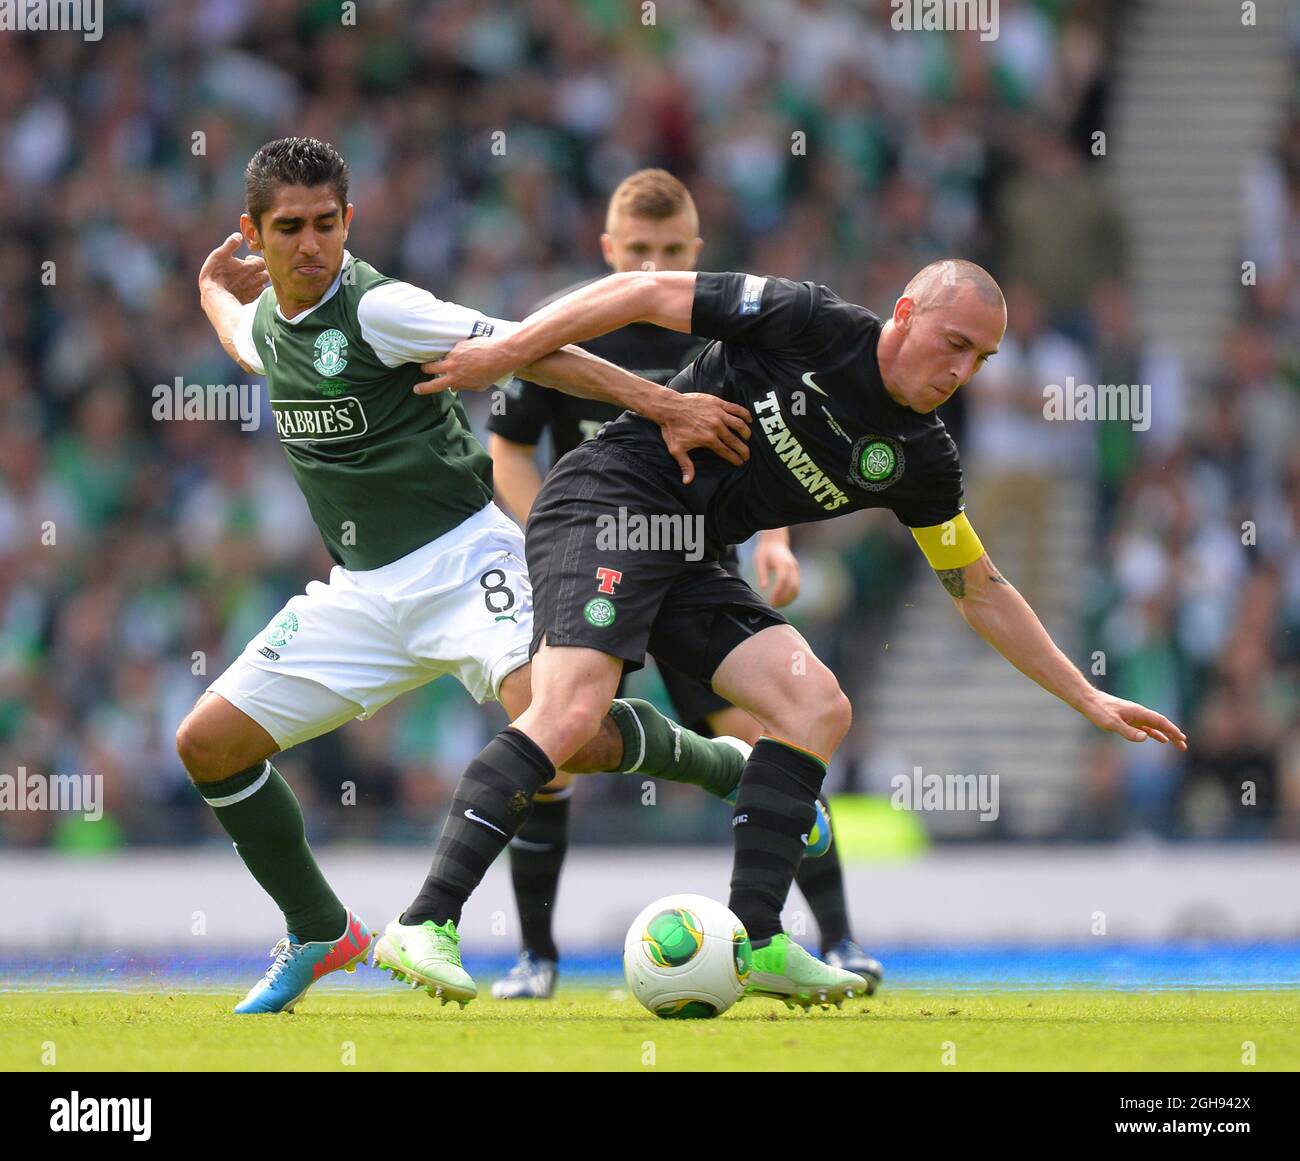 Celtic's Scott Brown holds off the challenge by Hibernian's Jorge Claros during the William Hill Scottish Cup Final between Hibernian and Celtic at the Hampden Park Stadium in Glasgow, Scotland on May 26, 2013. Picture Simon Bellis Stock Photo